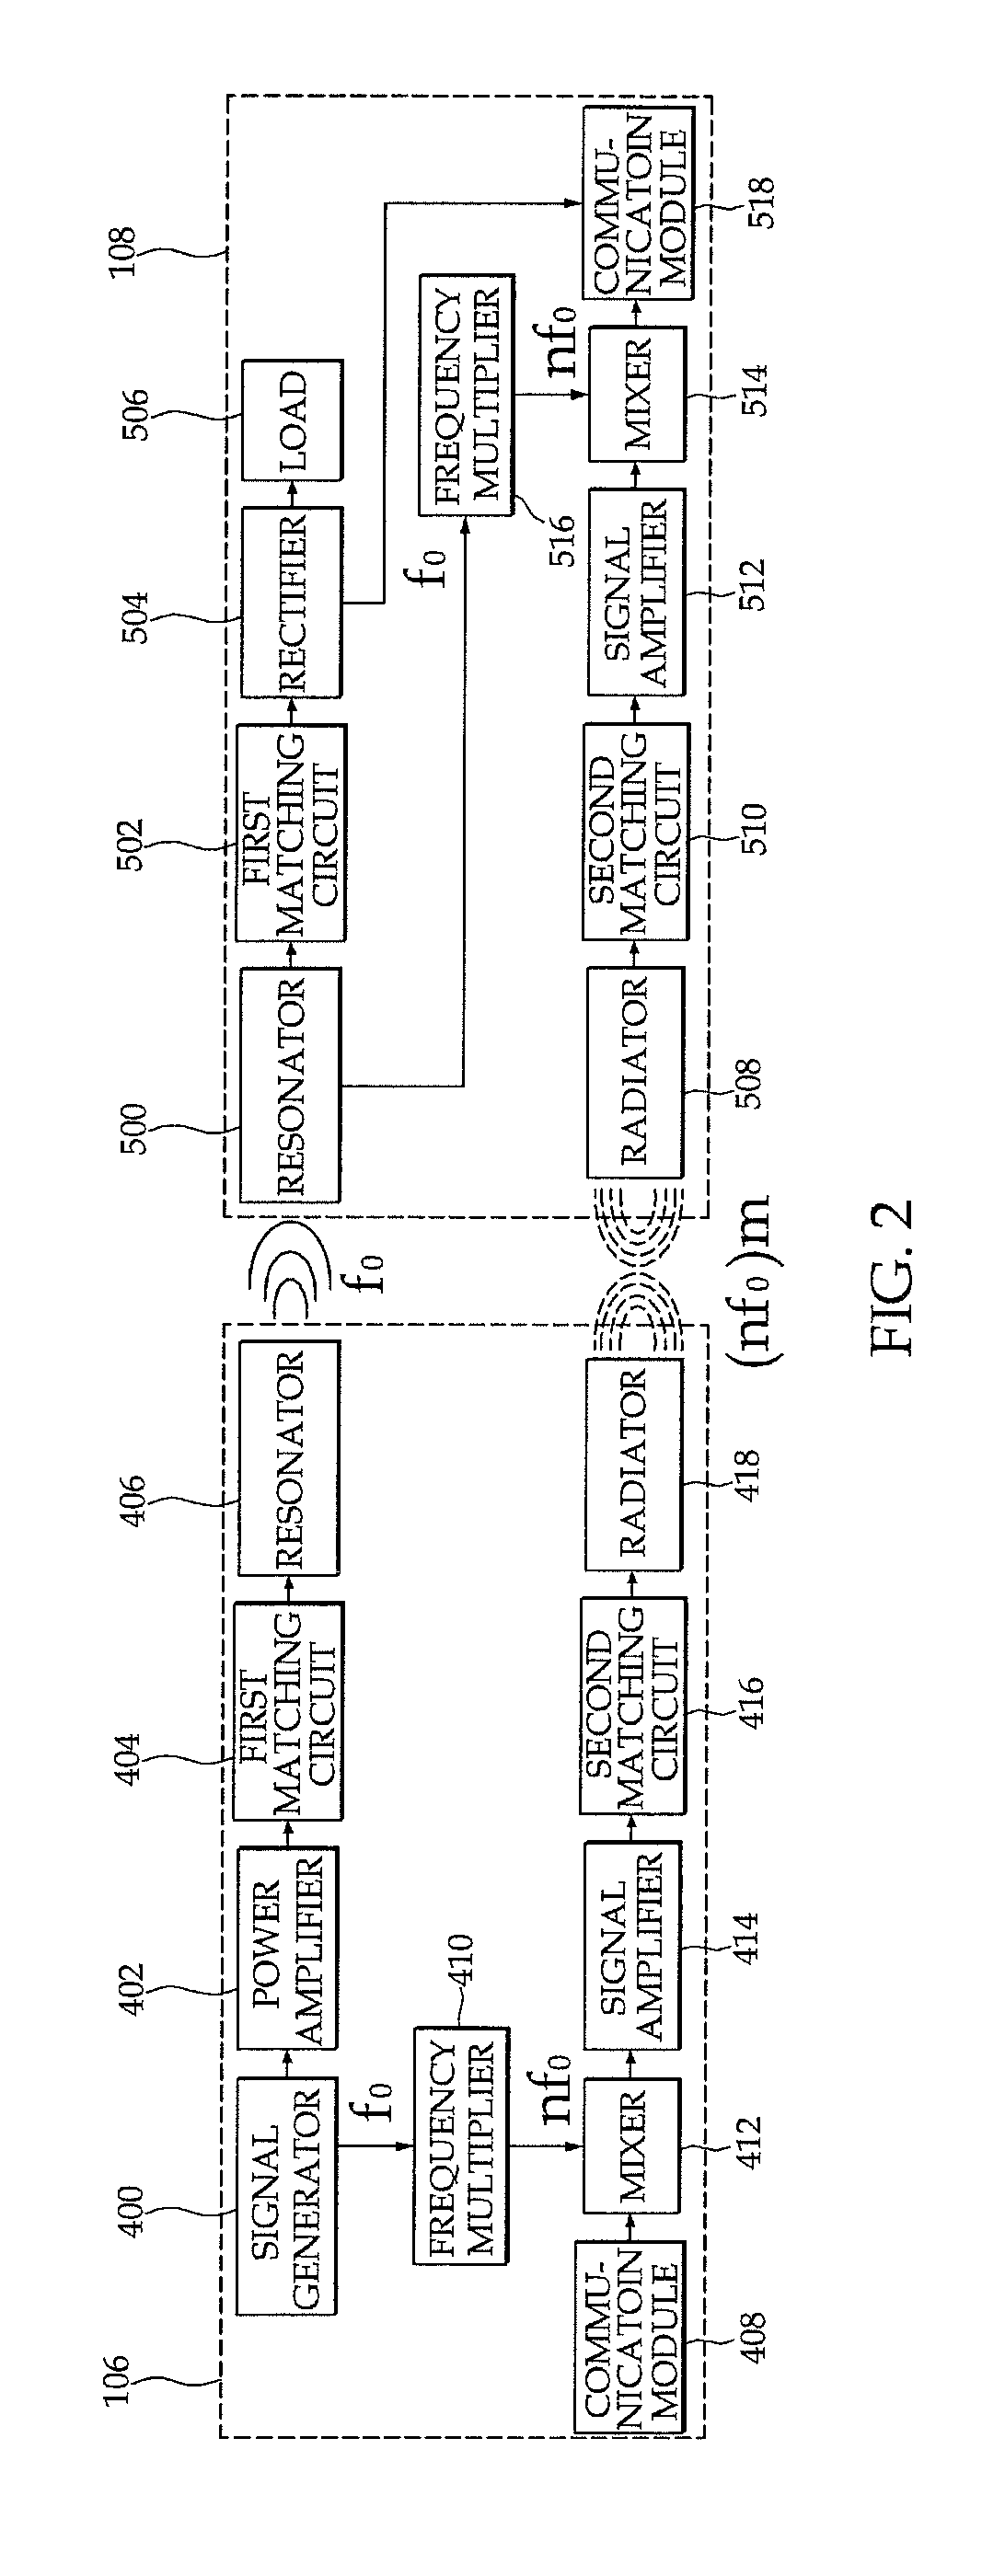 Apparatus and method for wirelessly transmitting and receiving energy and data